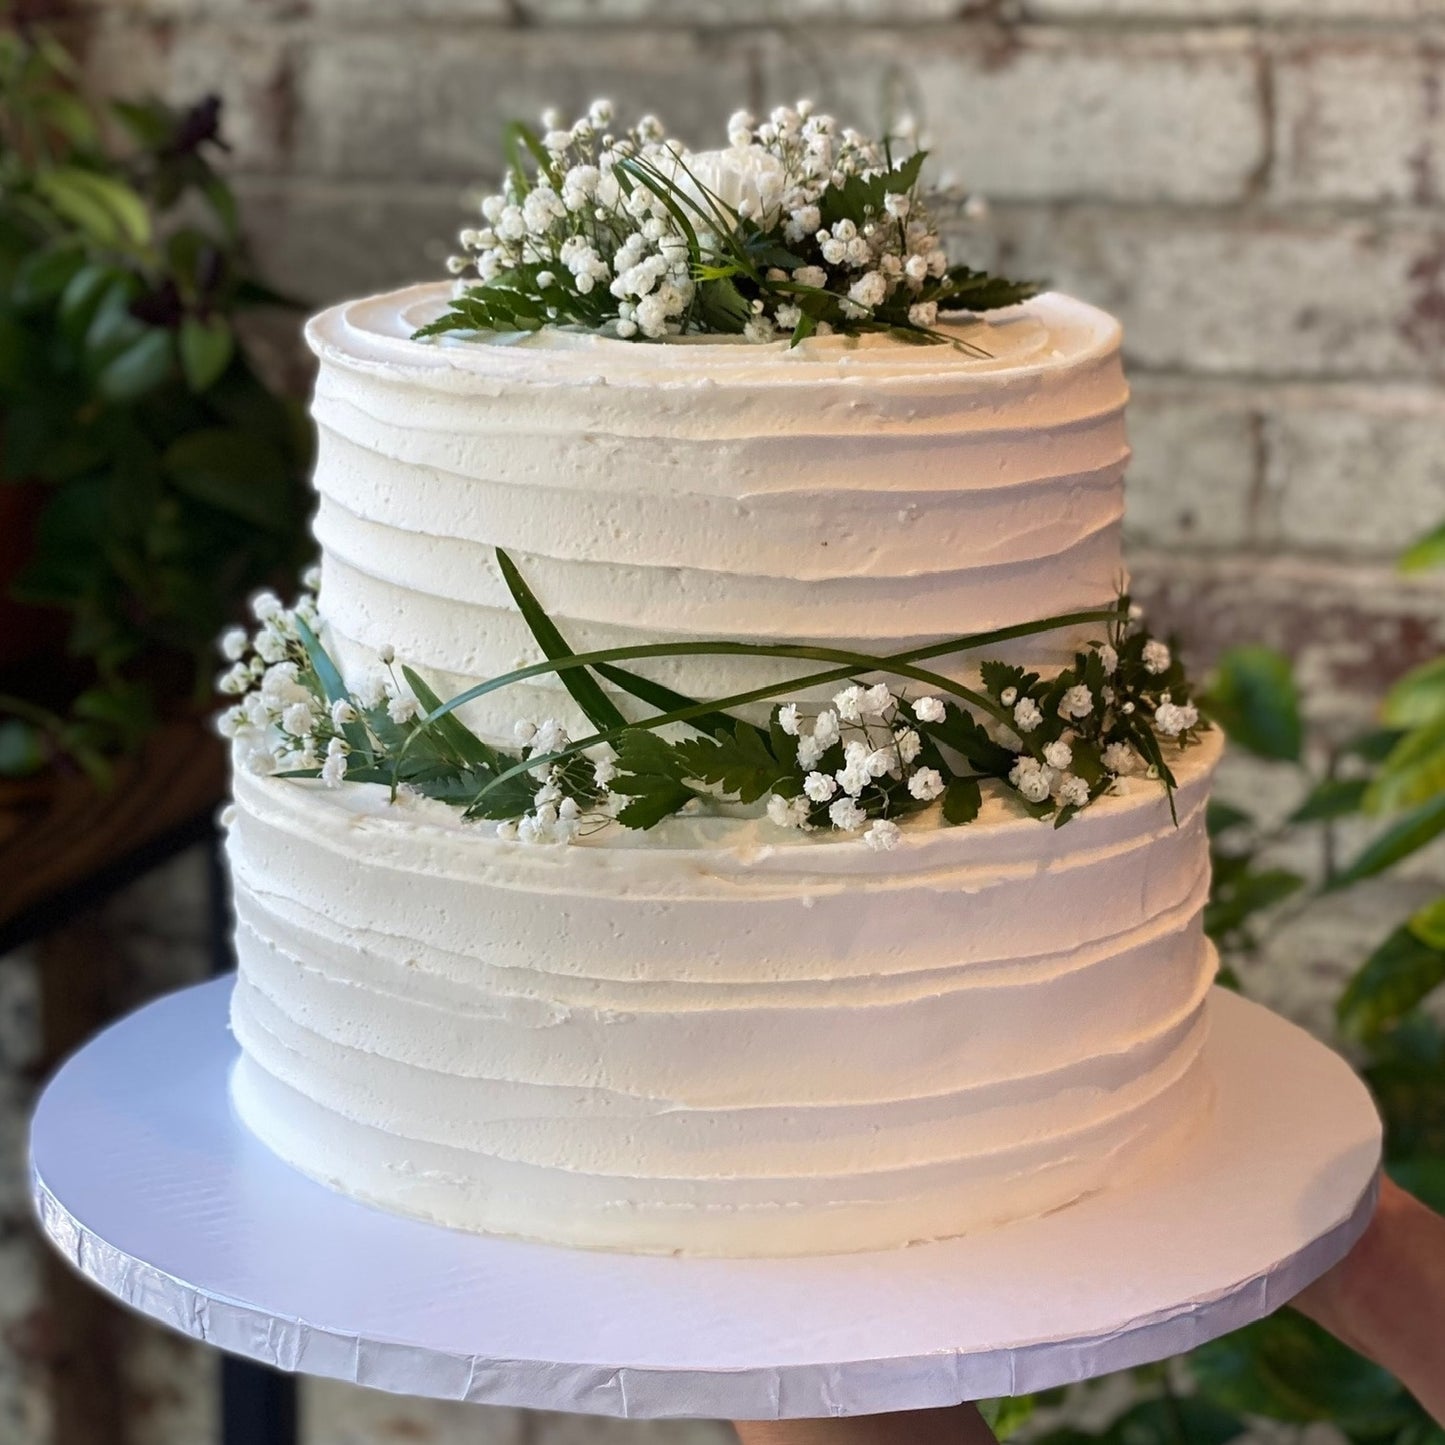 Two-tiered white cake with fresh baby's breath flowers